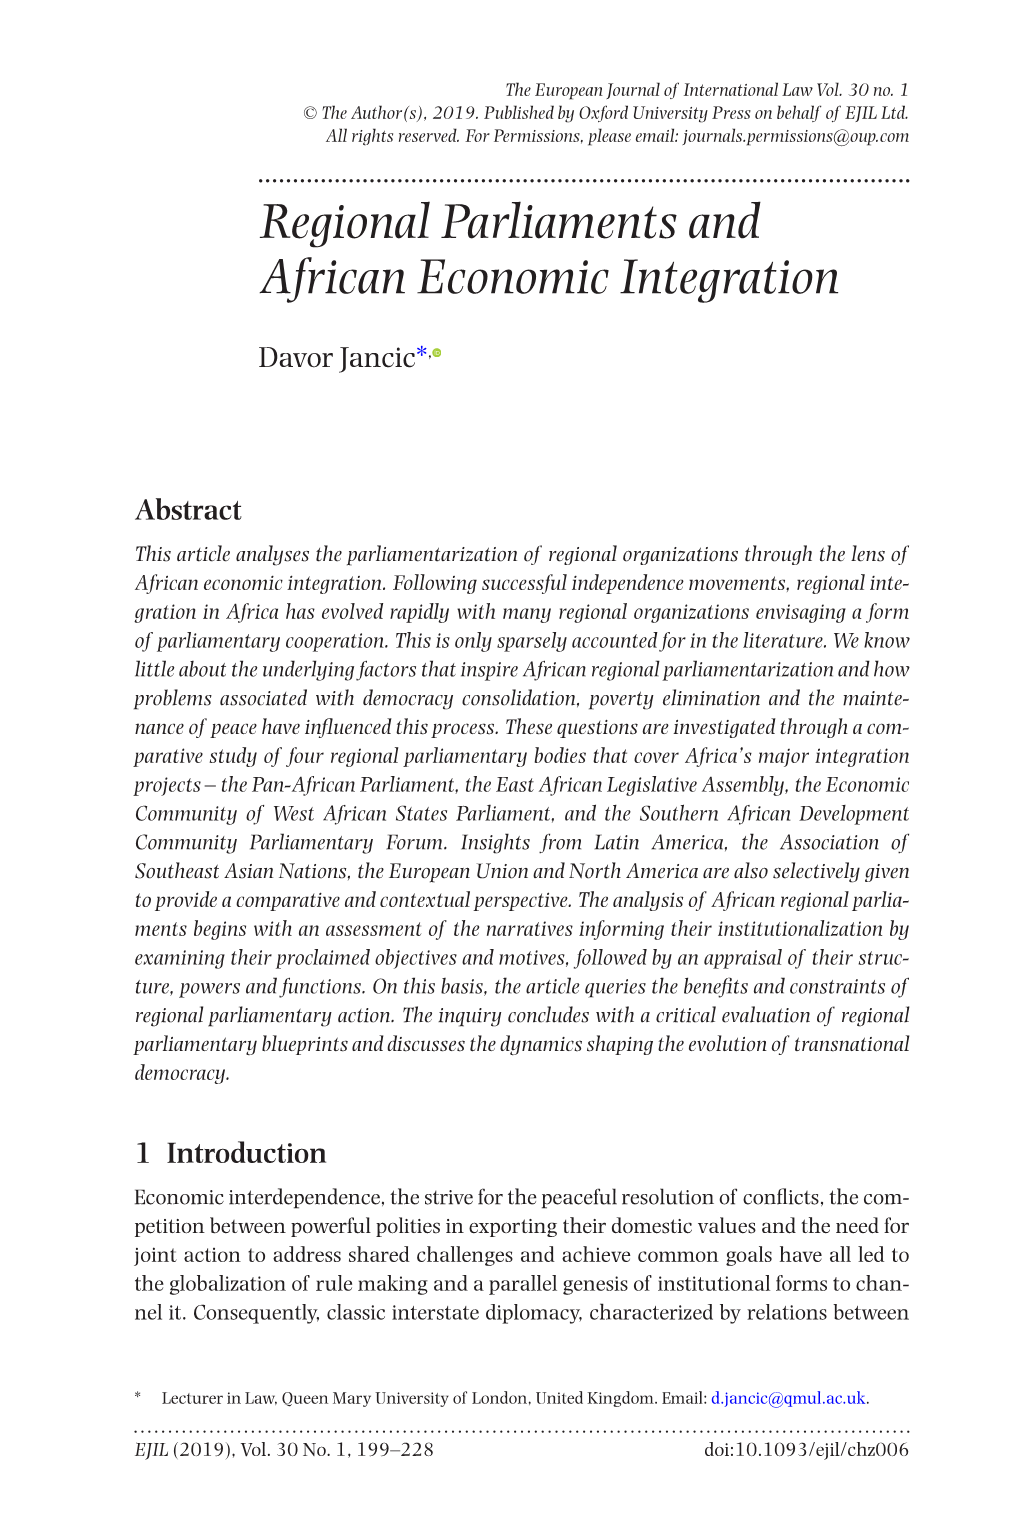 Regional Parliaments and African Economic Integration